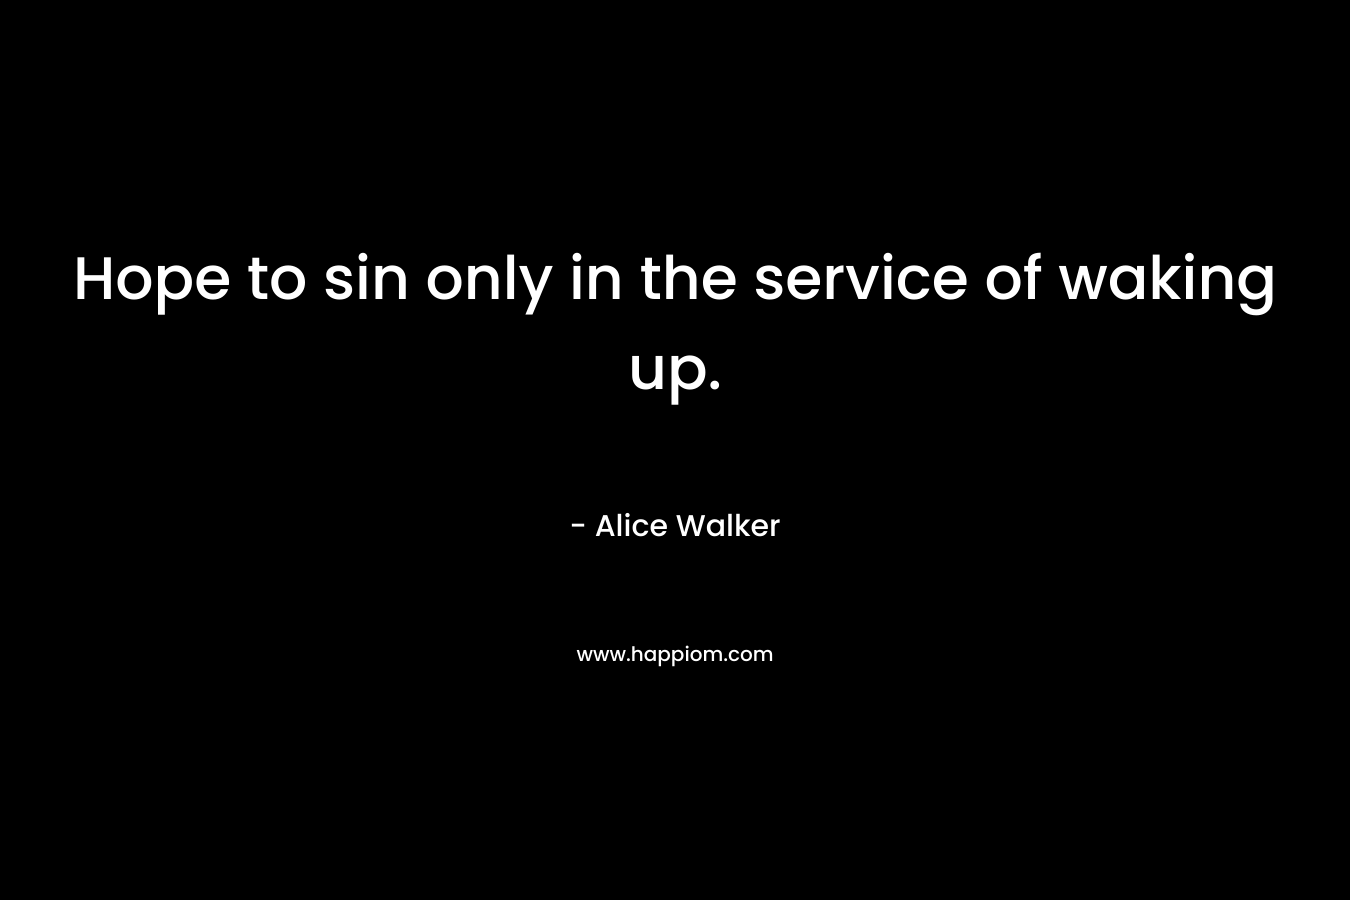 Hope to sin only in the service of waking up.